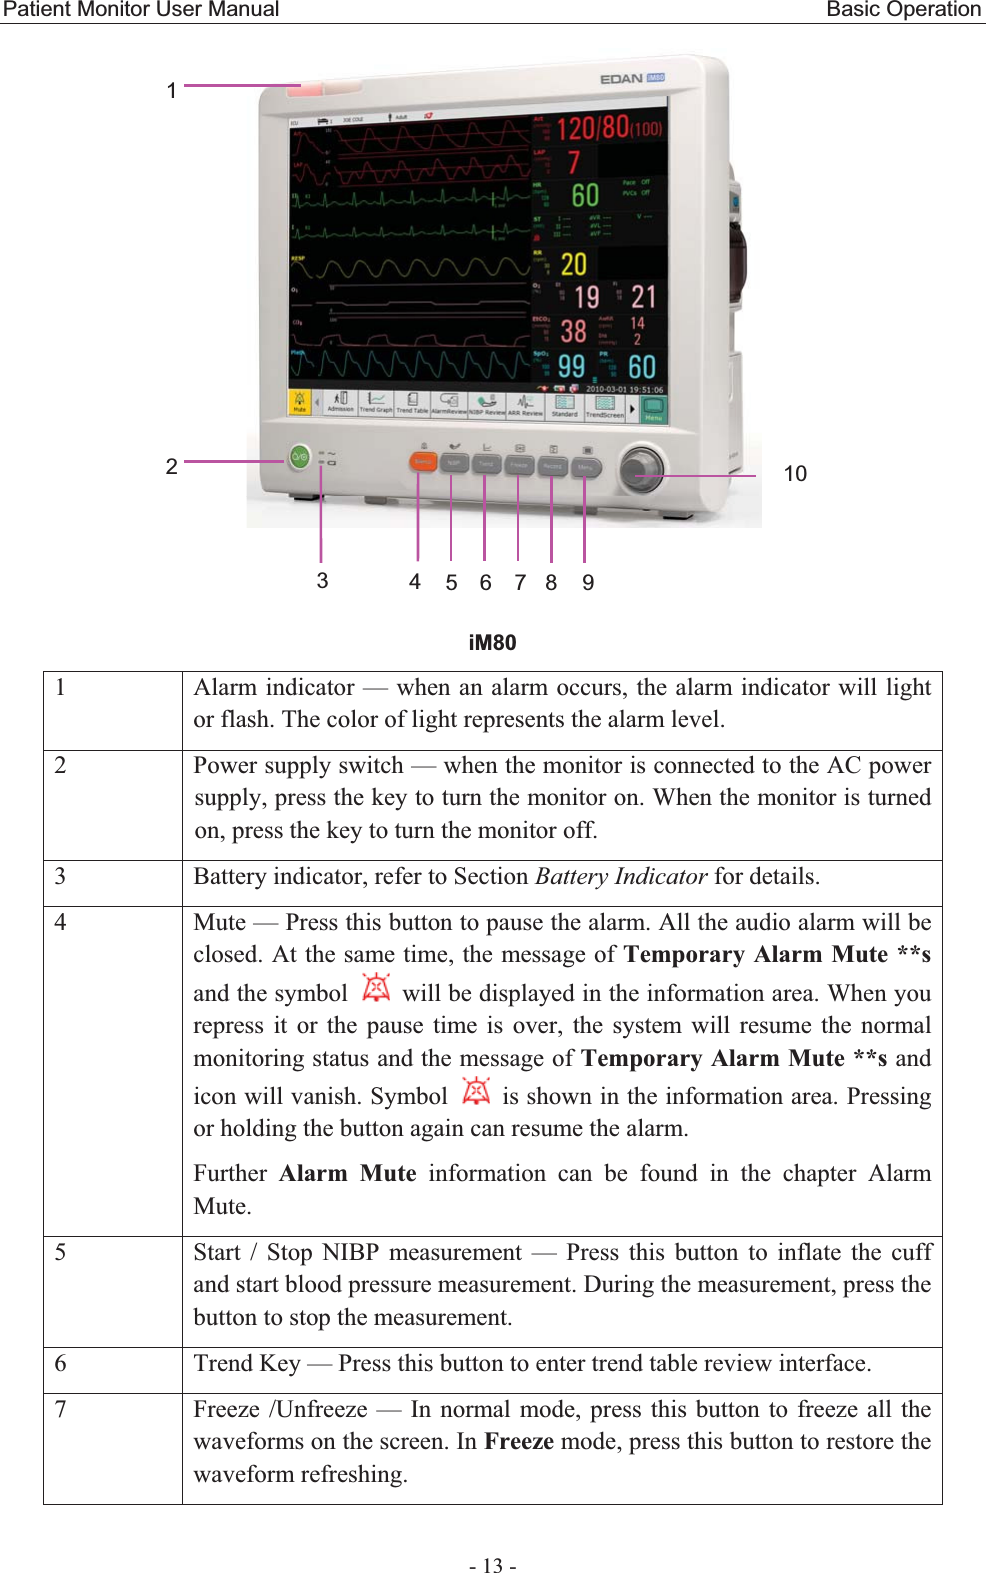 Patient Monitor User Manual                                                  Basic Operation  - 13 - iM801  Alarm indicator — when an alarm occurs, the alarm indicator will light or flash. The color of light represents the alarm level.   2  Power supply switch — when the monitor is connected to the AC power supply, press the key to turn the monitor on. When the monitor is turned on, press the key to turn the monitor off.   3  Battery indicator, refer to Section Battery Indicator for details.   4  Mute — Press this button to pause the alarm. All the audio alarm will be closed. At the same time, the message of Temporary Alarm Mute **s and the symbol    will be displayed in the information area. When you repress it or the pause time is over, the system will resume the normal monitoring status and the message of Temporary Alarm Mute **s and icon will vanish. Symbol    is shown in the information area. Pressing or holding the button again can resume the alarm.   Further  Alarm Mute information can be found in the chapter Alarm Mute. 5  Start / Stop NIBP measurement — Press this button to inflate the cuff and start blood pressure measurement. During the measurement, press the button to stop the measurement. 6  Trend Key — Press this button to enter trend table review interface.   7  Freeze /Unfreeze — In normal mode, press this button to freeze all the waveforms on the screen. In Freeze mode, press this button to restore the waveform refreshing. 32145678910